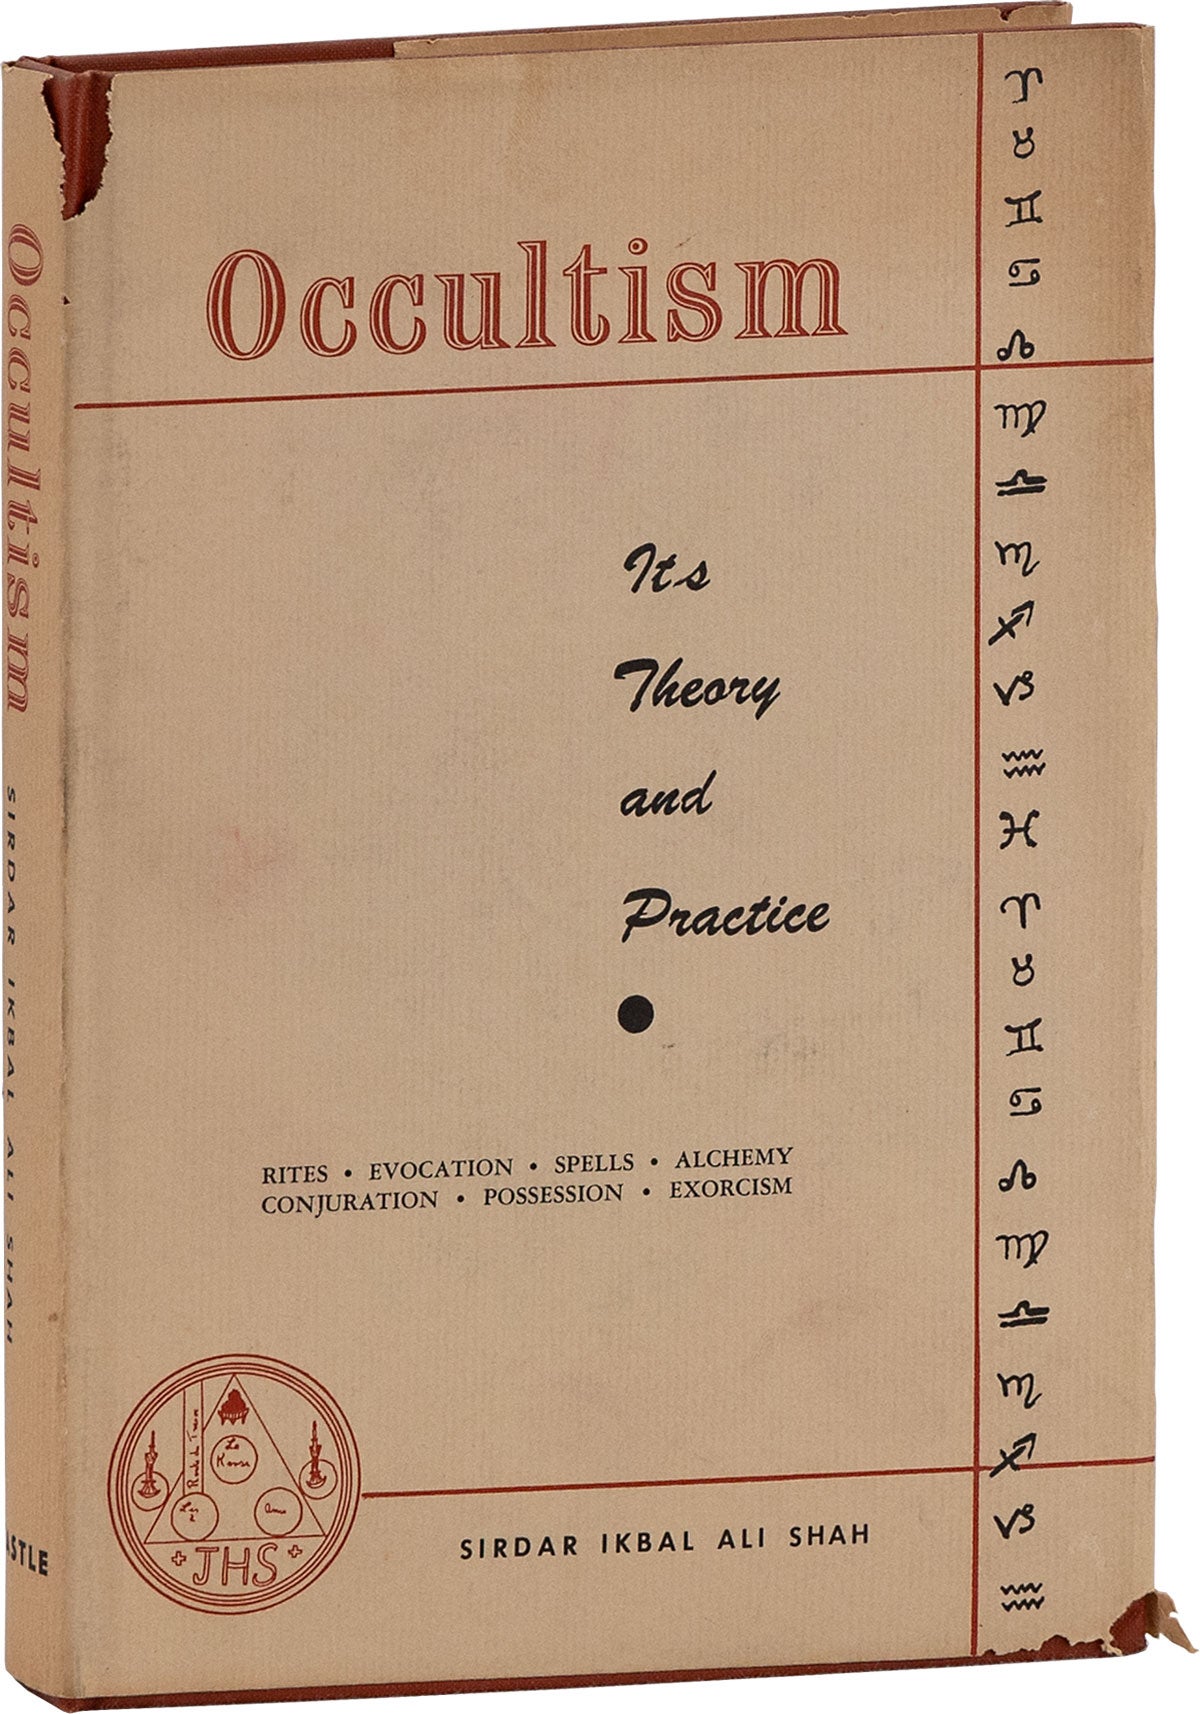 [Item #80748] Occultism: Its Theory and Practice. Sirdar Ikbal Ali SHAH.